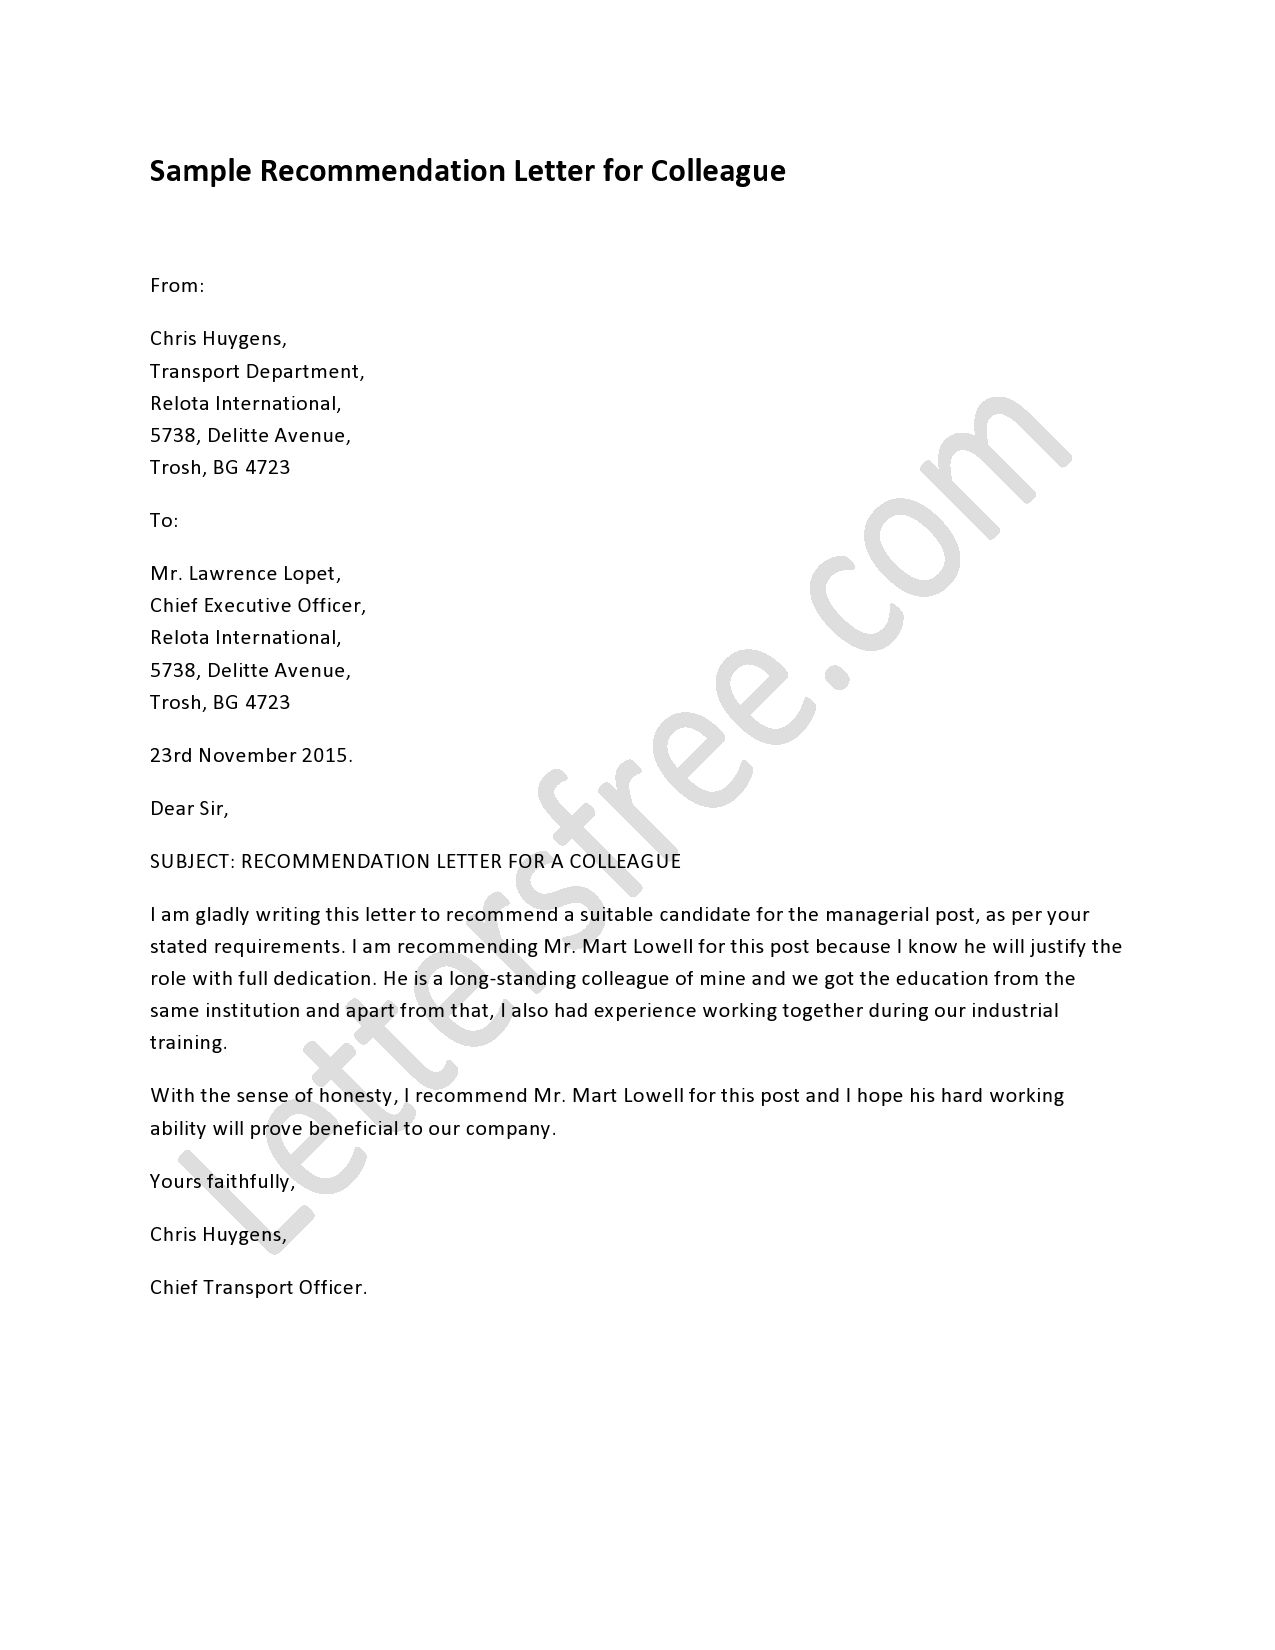 Recommendation Letter For Colleague Lettering Writing A inside sizing 1275 X 1650